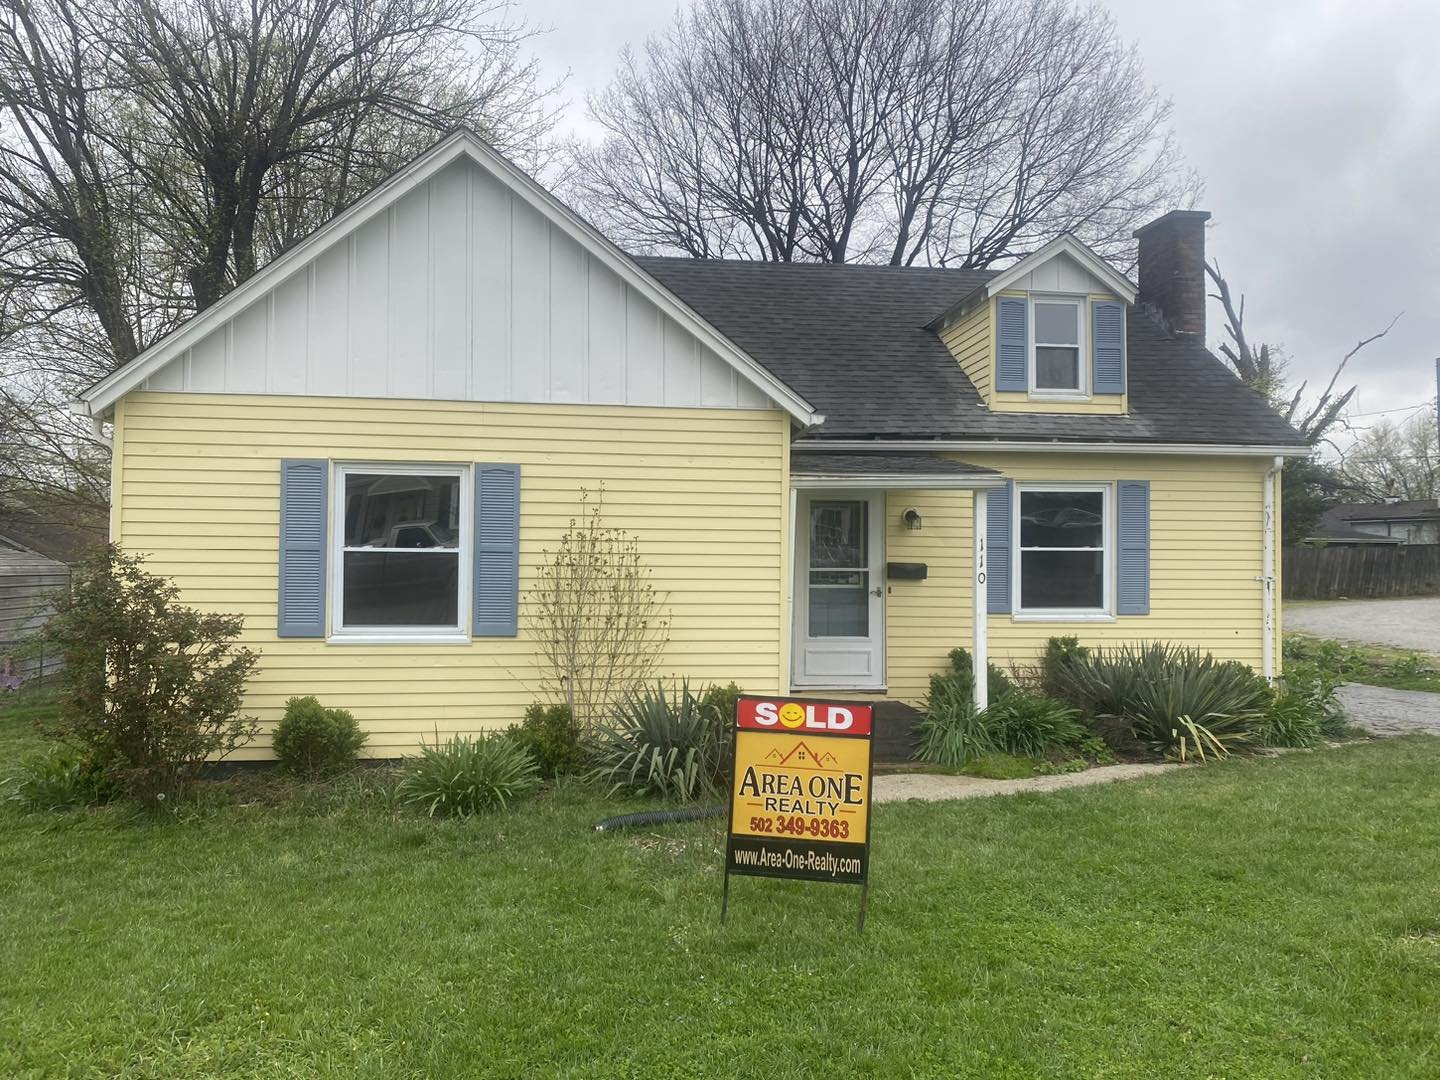 💥‼️💥SOLD💥‼️💥SOLD💥‼️💥SOLD
Another wonderful Historic Bardstown, Ky home 🏡 SOLD at 110 S. Kennett Avenue by Mike &amp; Kathy Ballard of Area One Realty!!

Are you ready to make a move? Area One Realty can help you every step of the way! Give us 